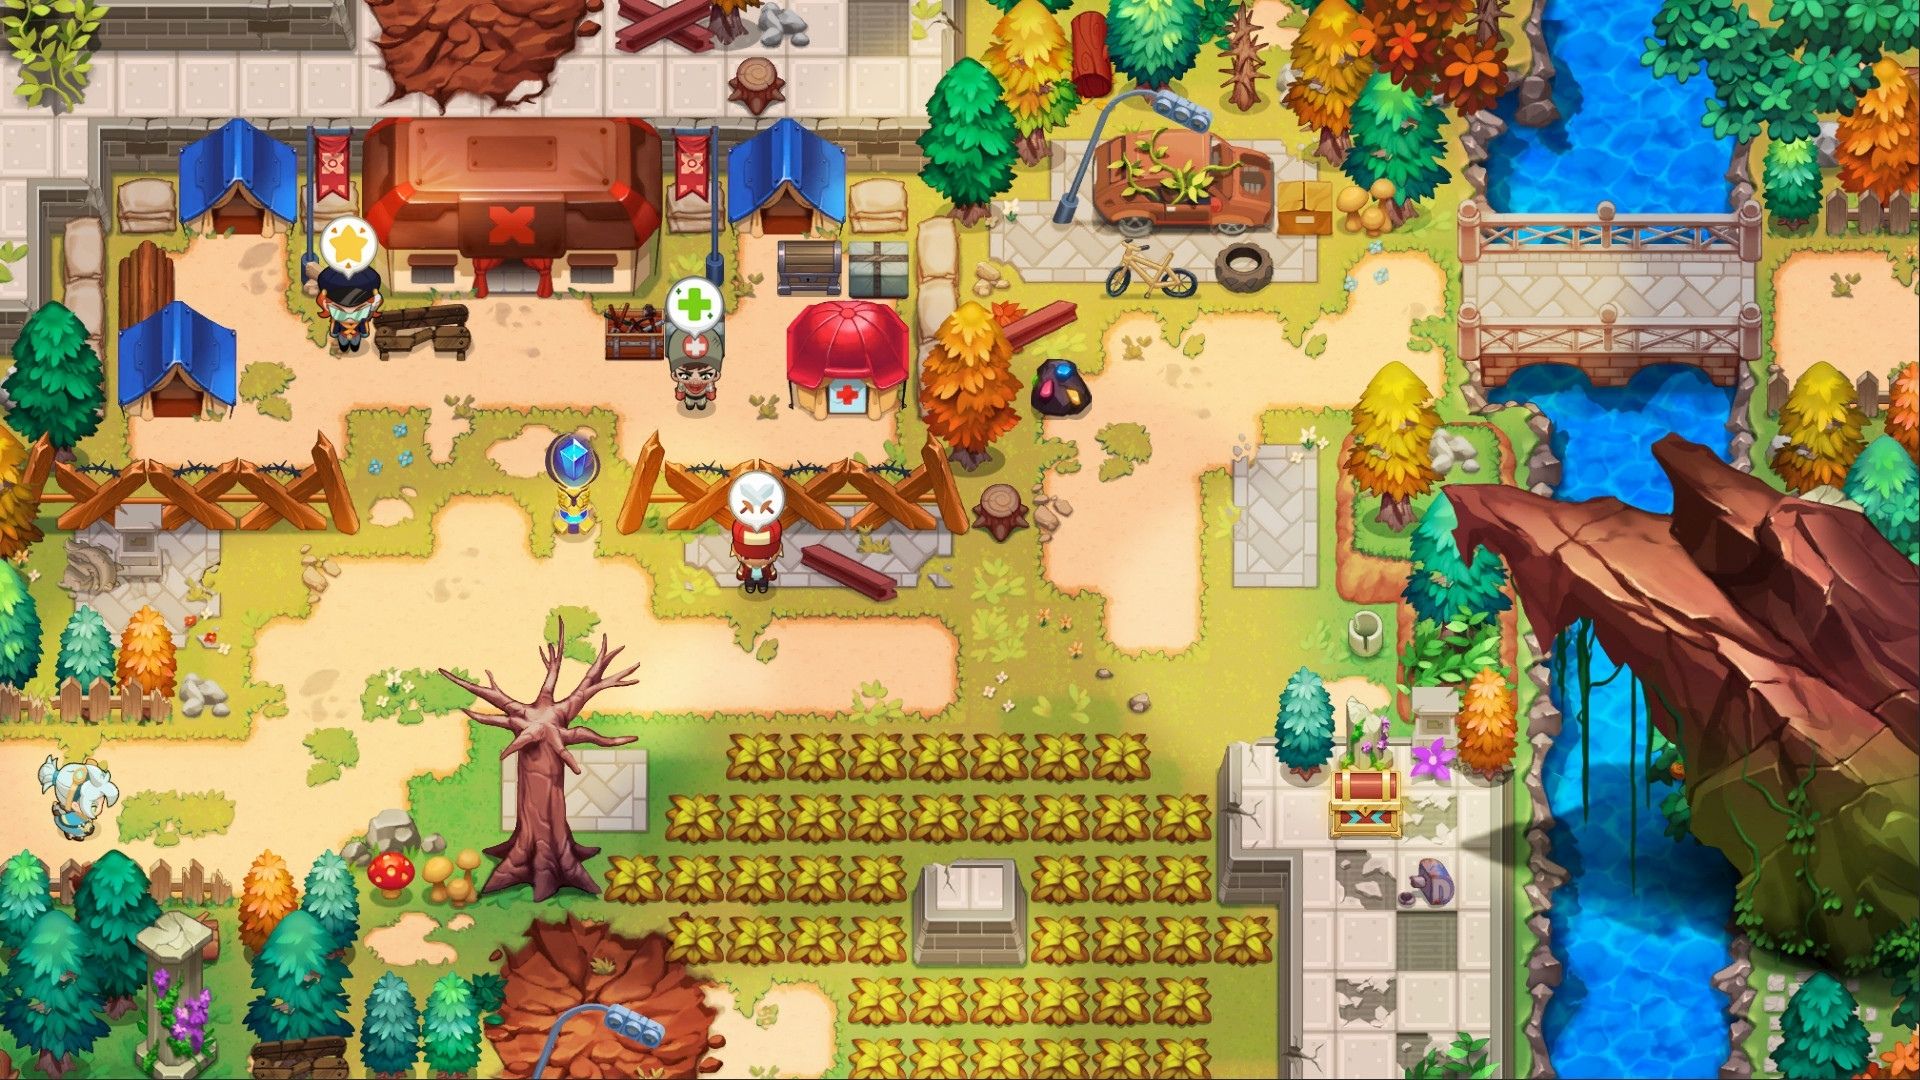 A screenshot from Nexomon, a game like Pokémon, showing an overworked in classic Pokemon style, littered with objects, weeds, trees, and such.